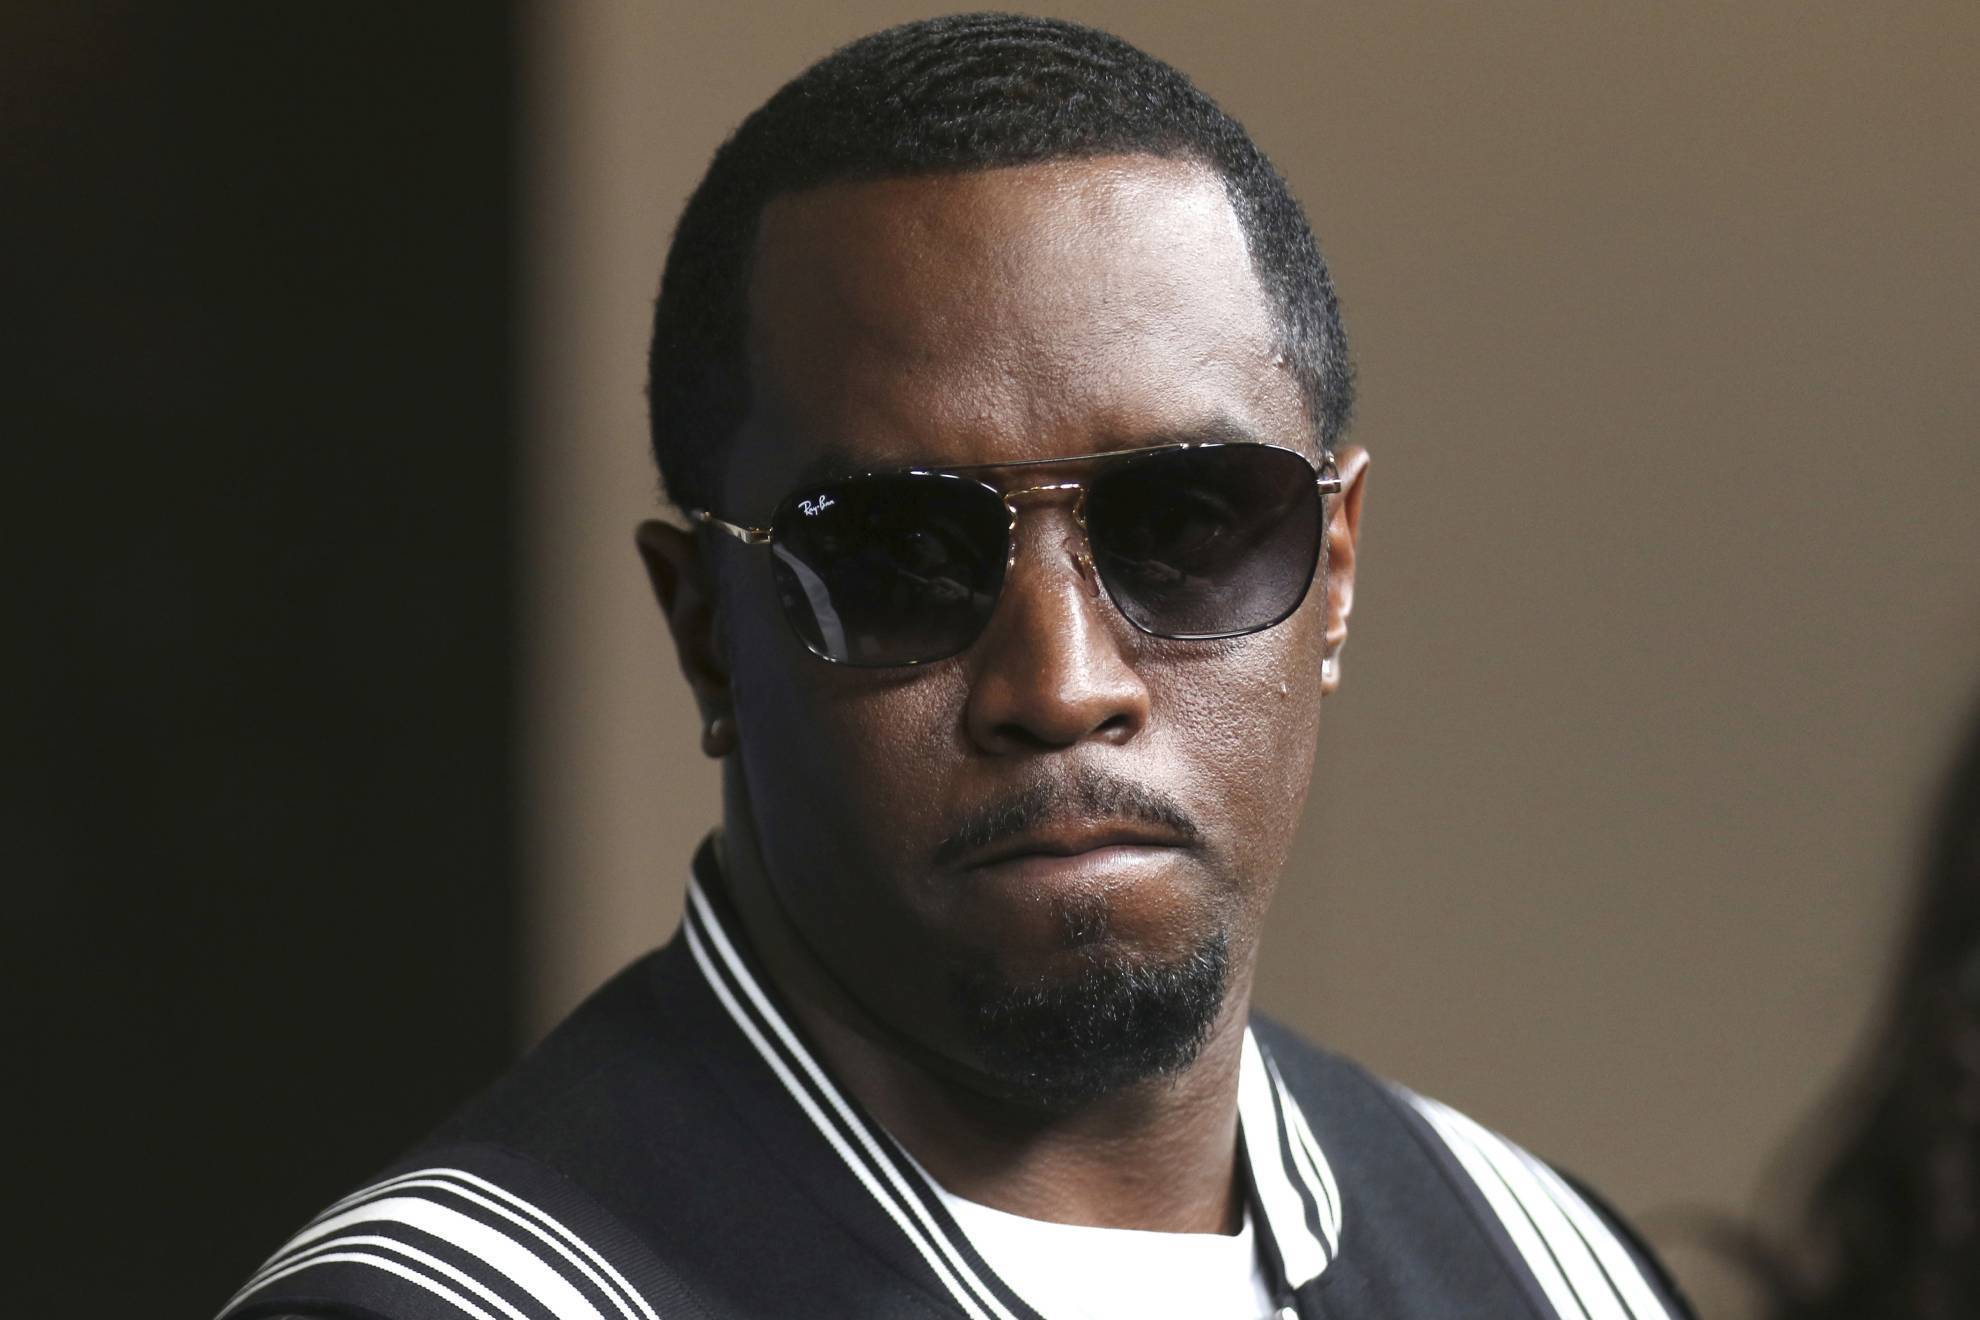 Sean Diddy Combs jets off on private plane as federal investigation into rap mogul continues